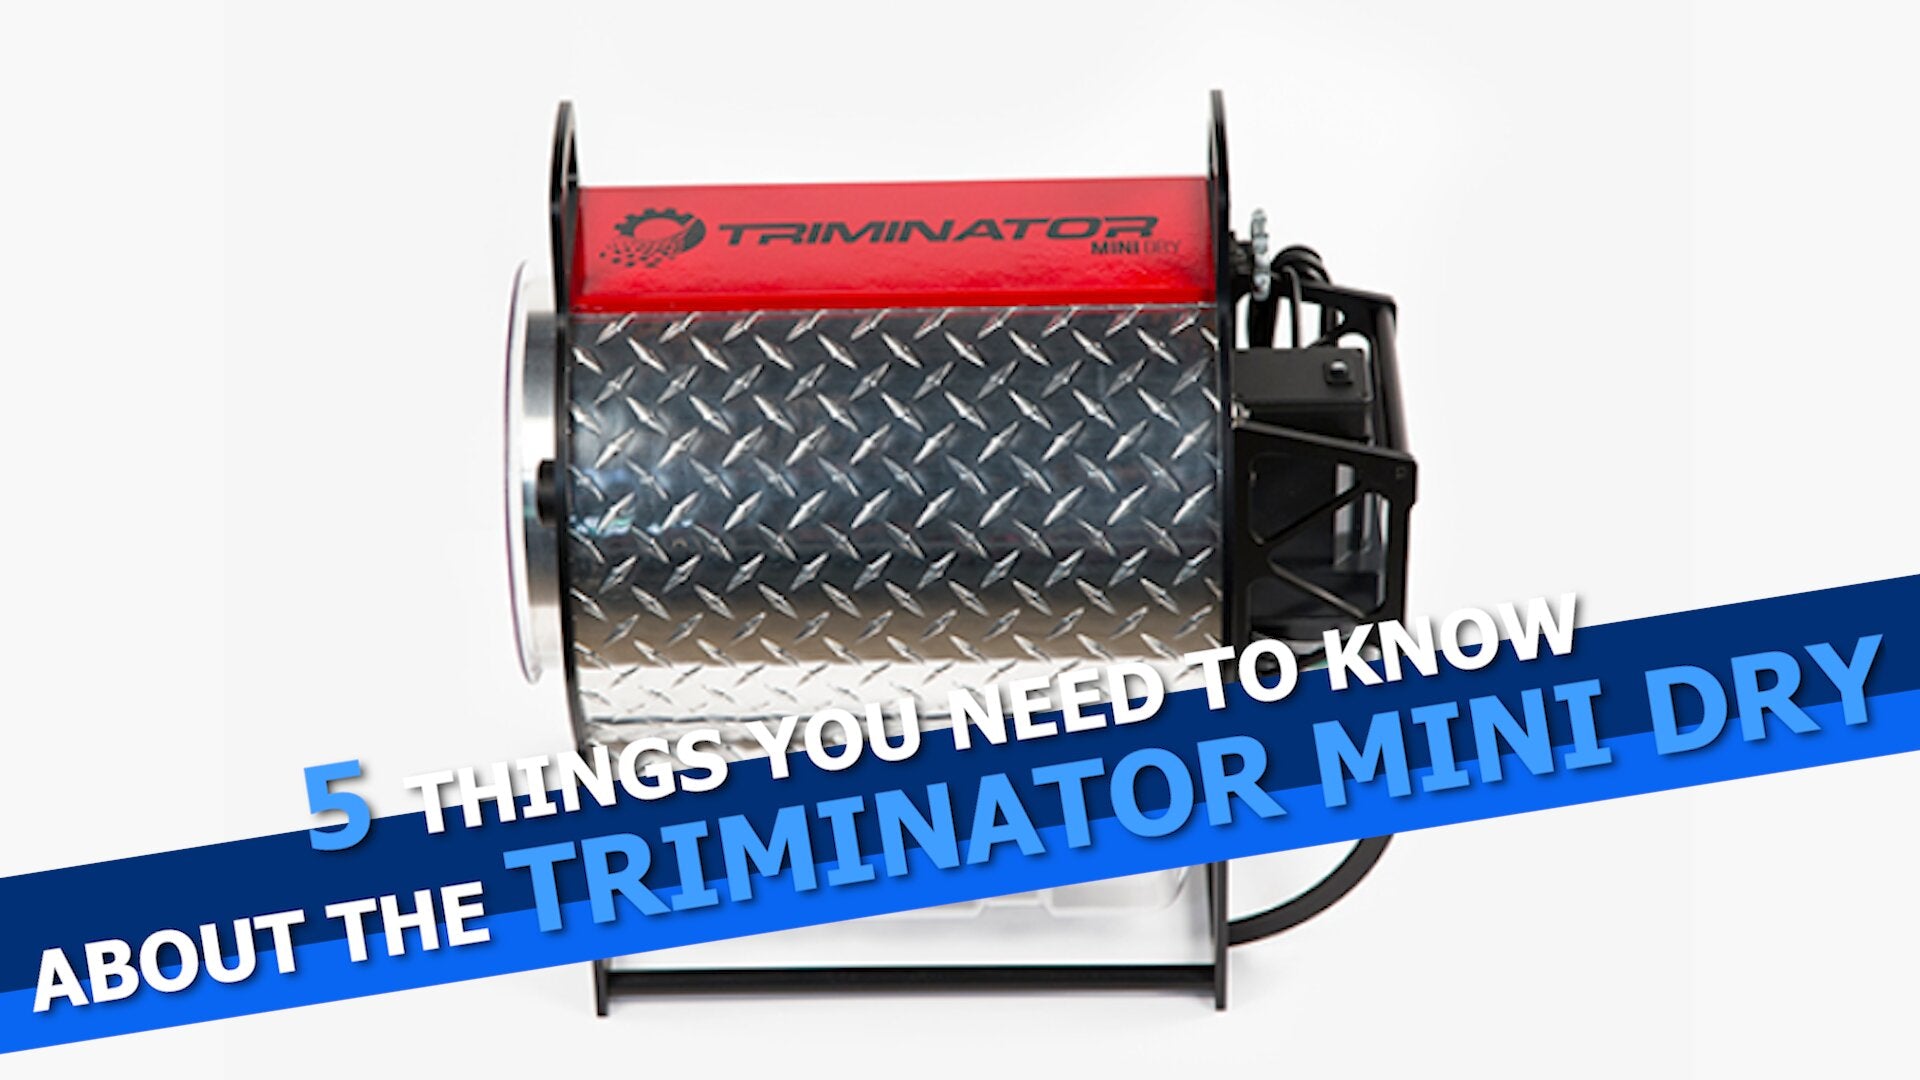 5 Things You Need To Know About The Triminator Mini Dry Bud Trimmer